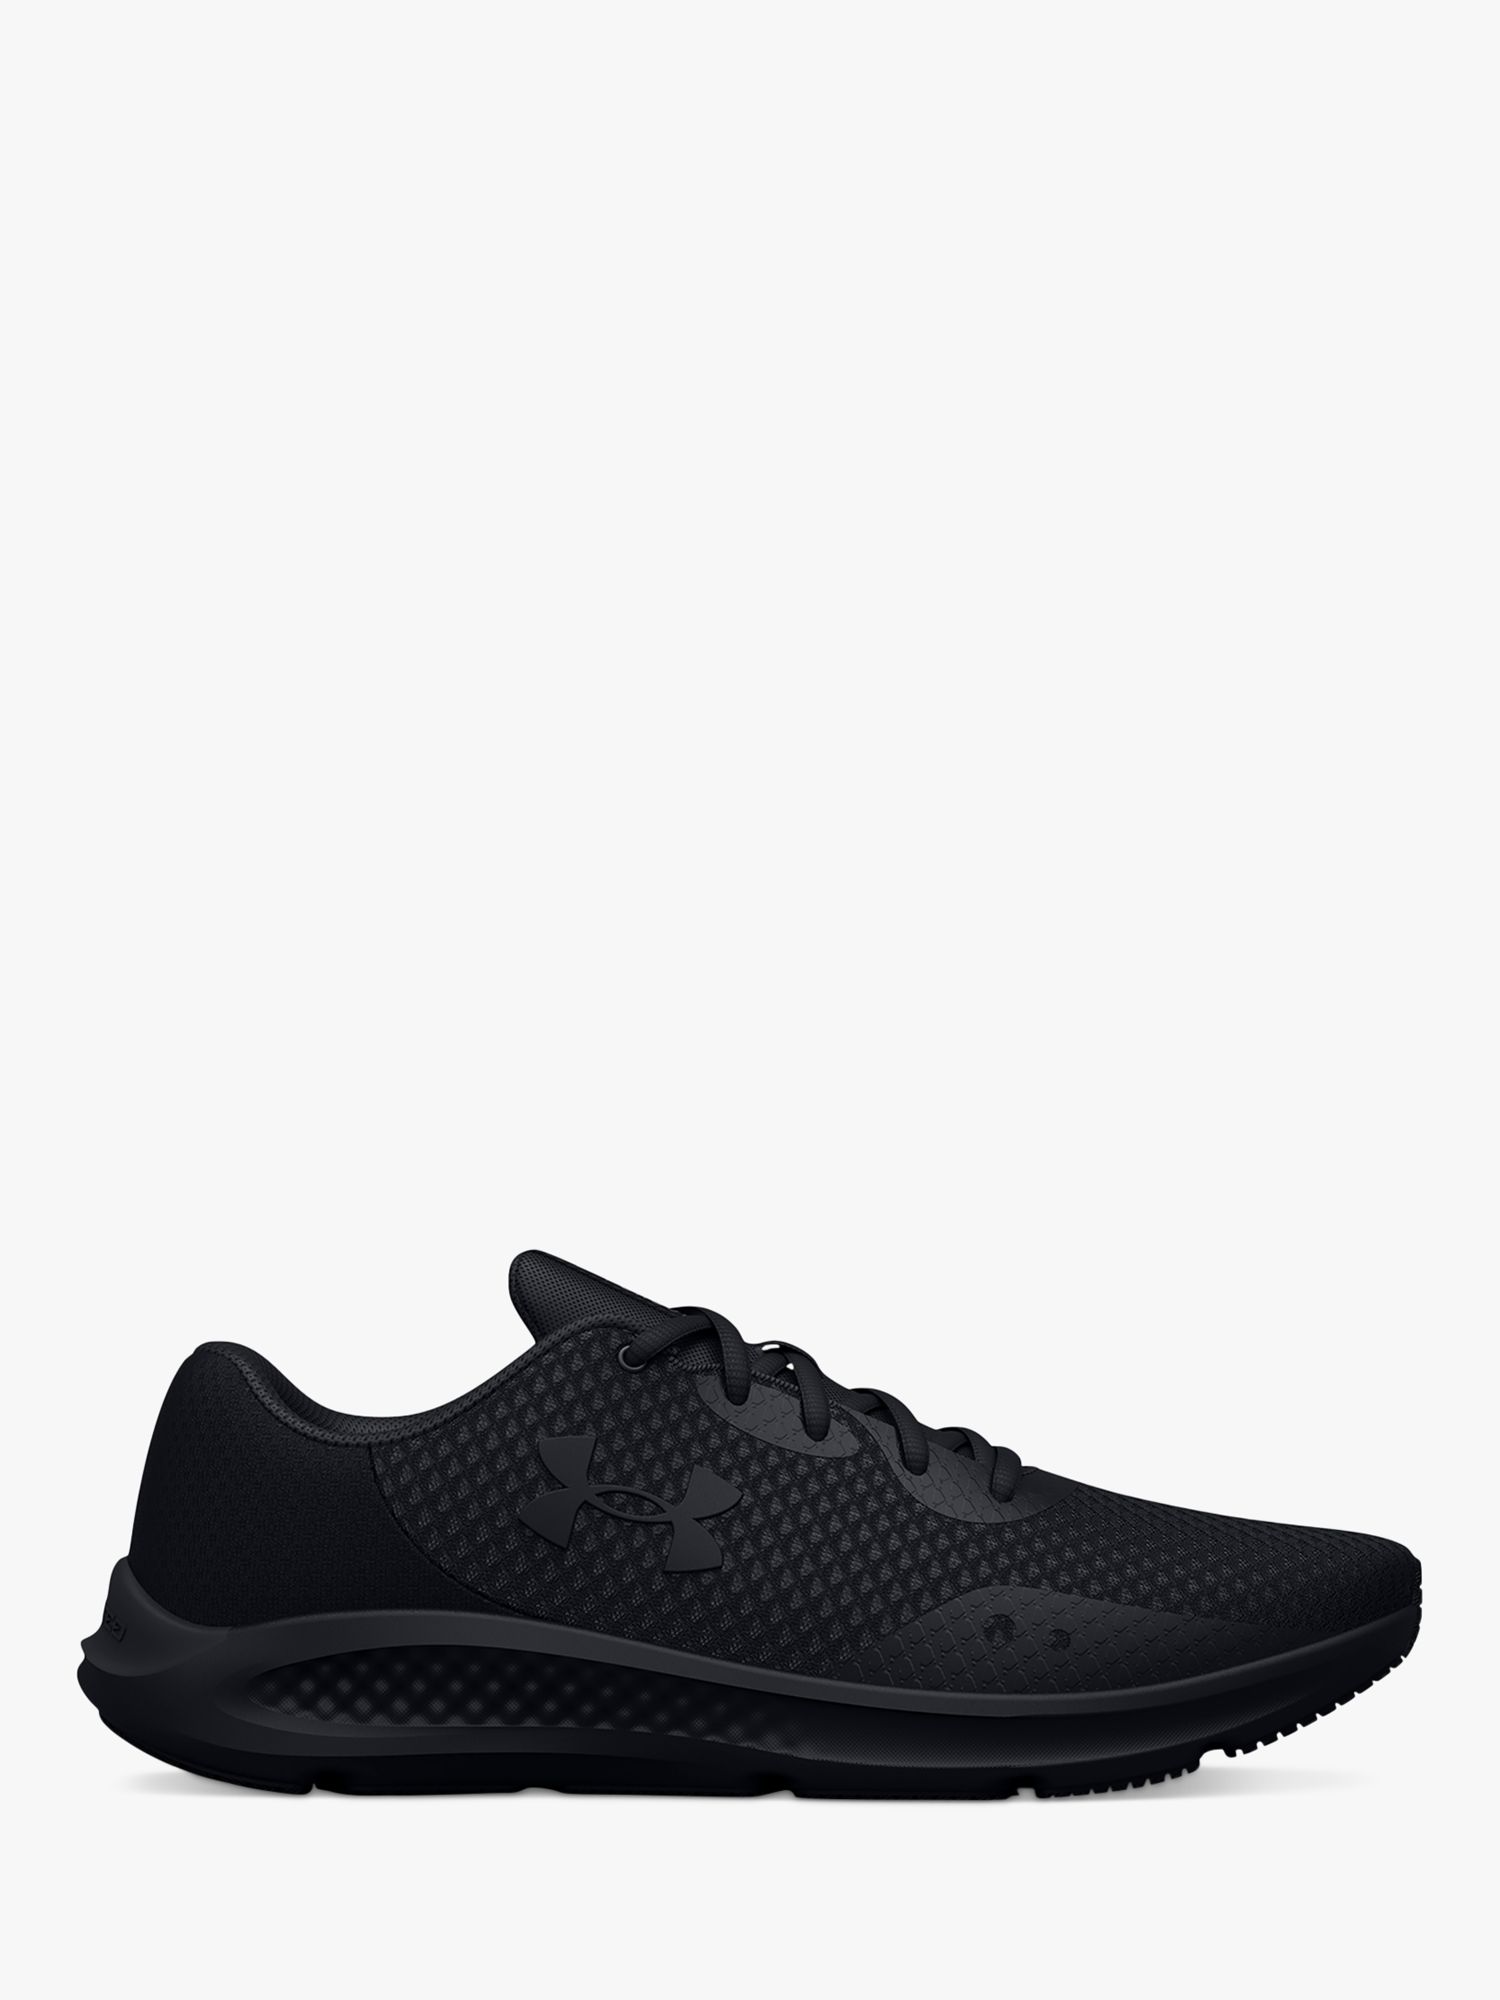 Under Armour Charged Pursuit 3 Women's Running Shoes, Black at